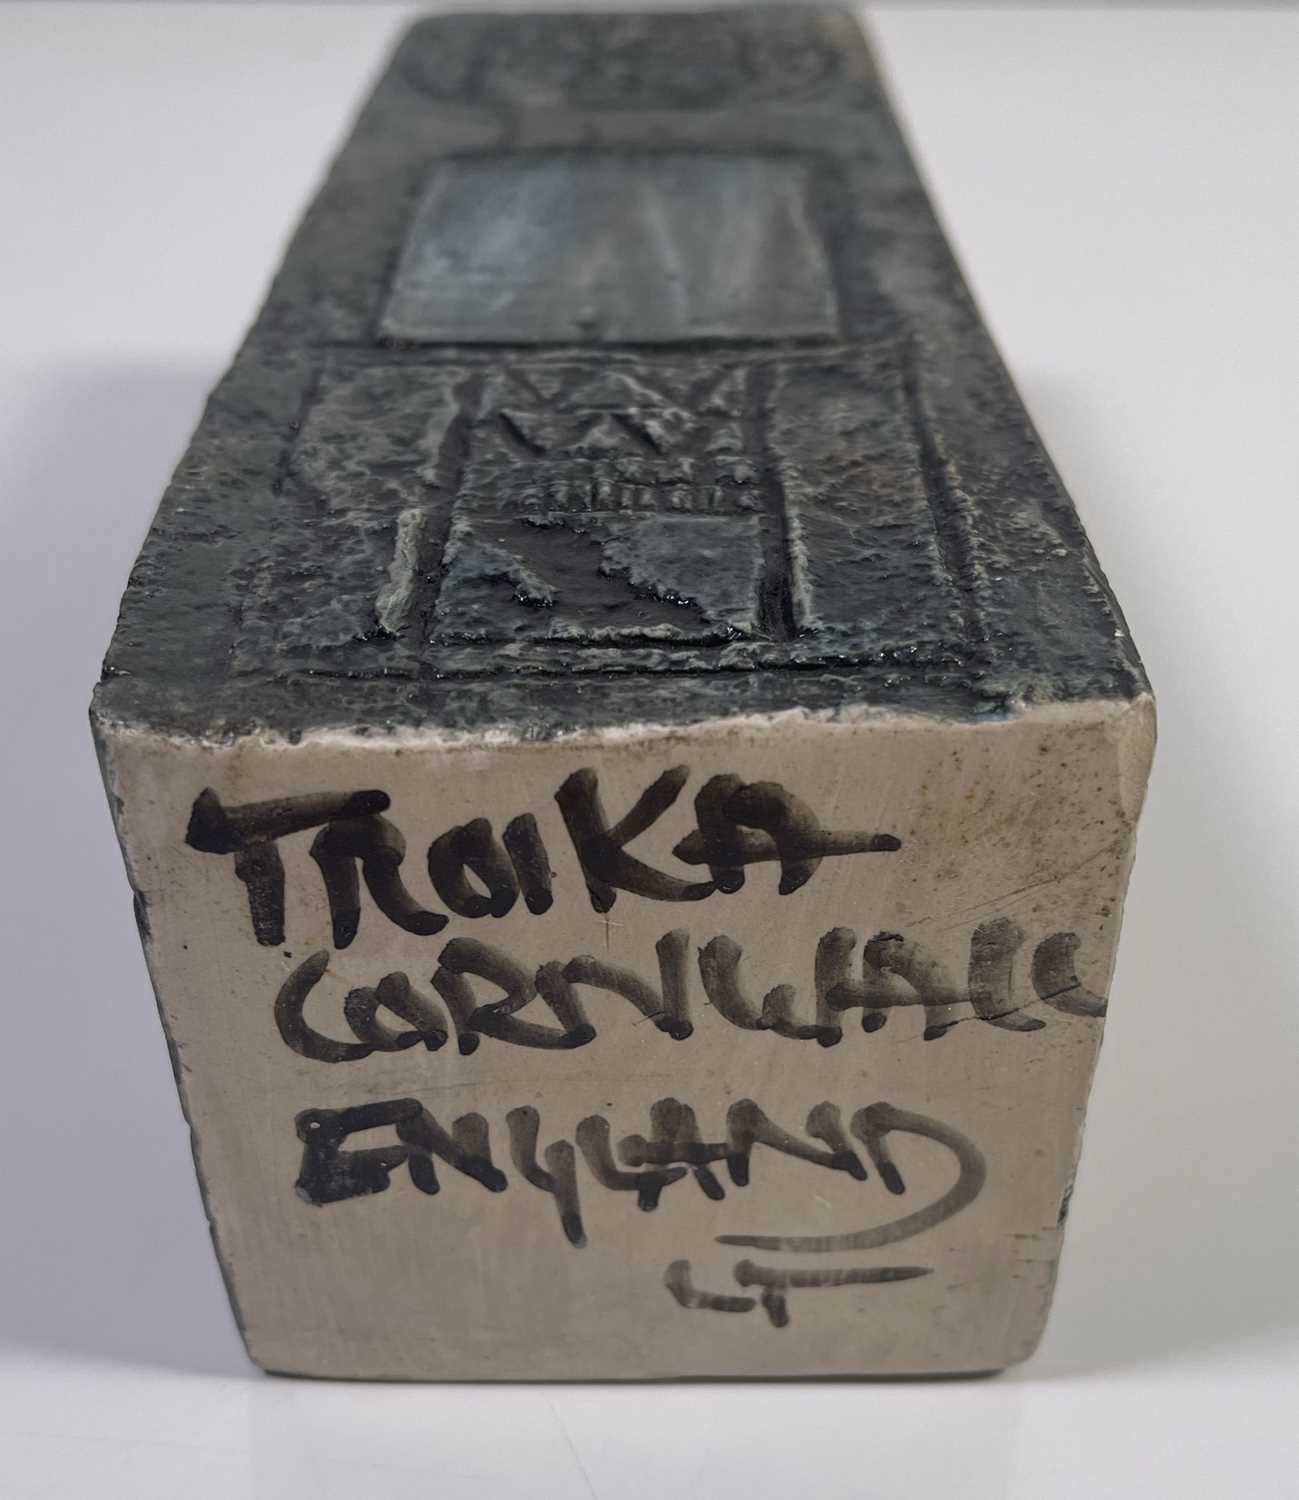 TROIKA - RECTANGULAR VASE BY ANNE LEWIS. - Image 3 of 3